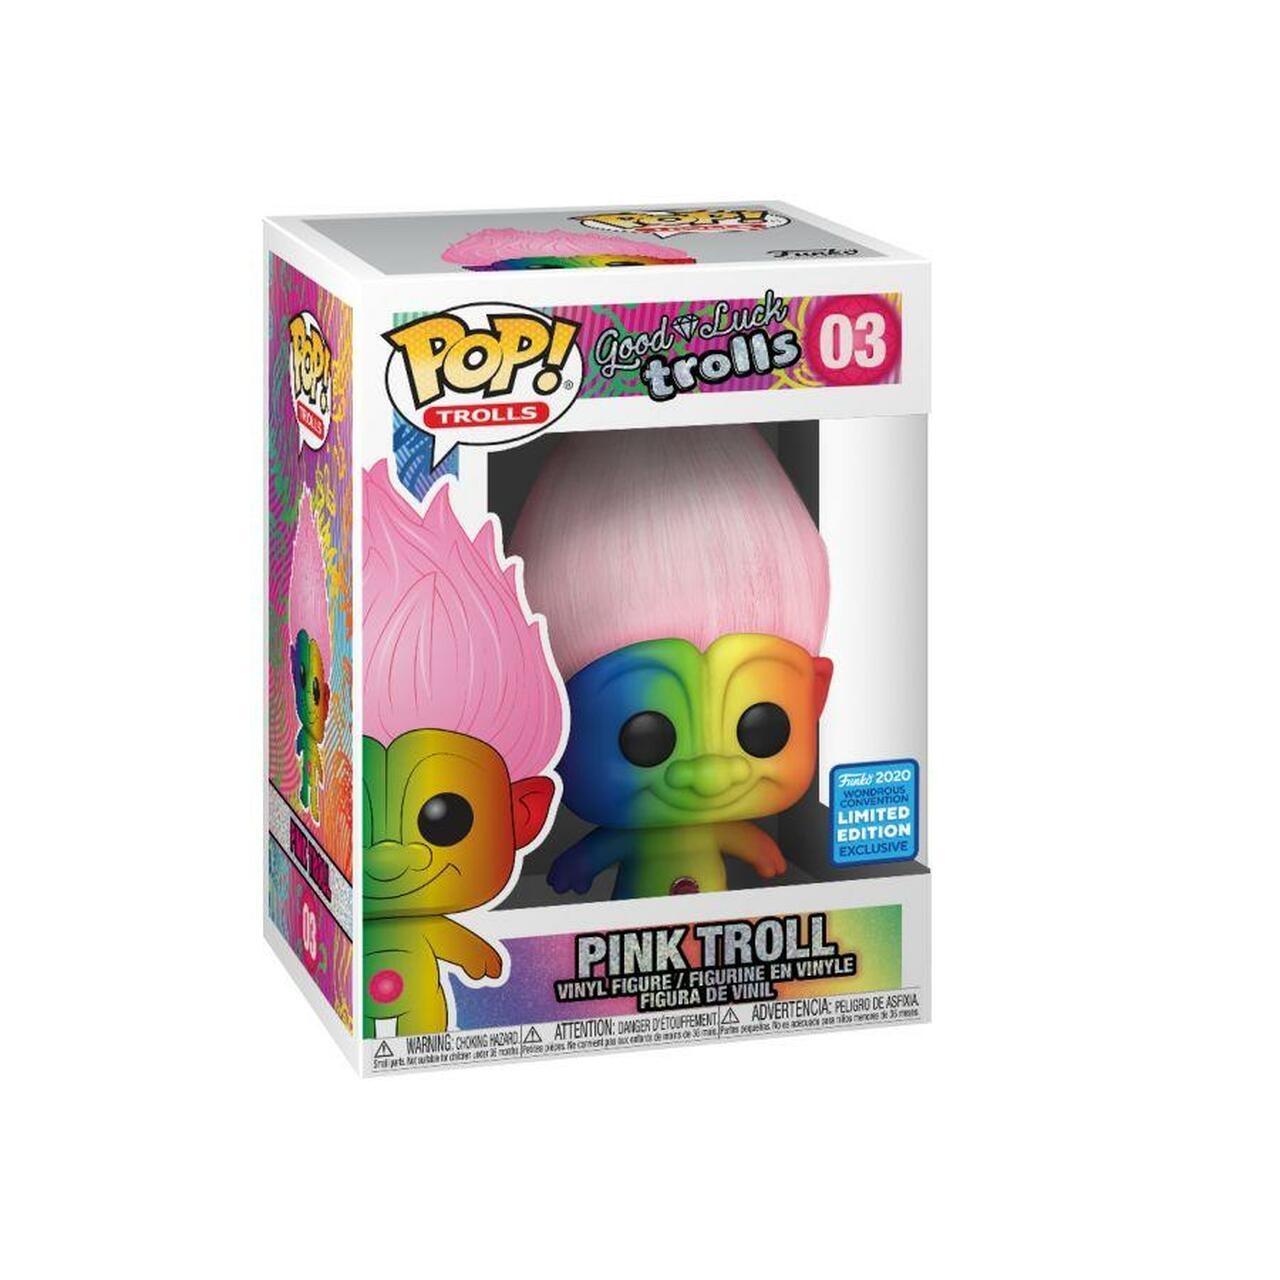 POP! Pink Troll! Funko 2020! Wondrous Convention !Limited Edition! Exclusive - TantrumCollectibles.com